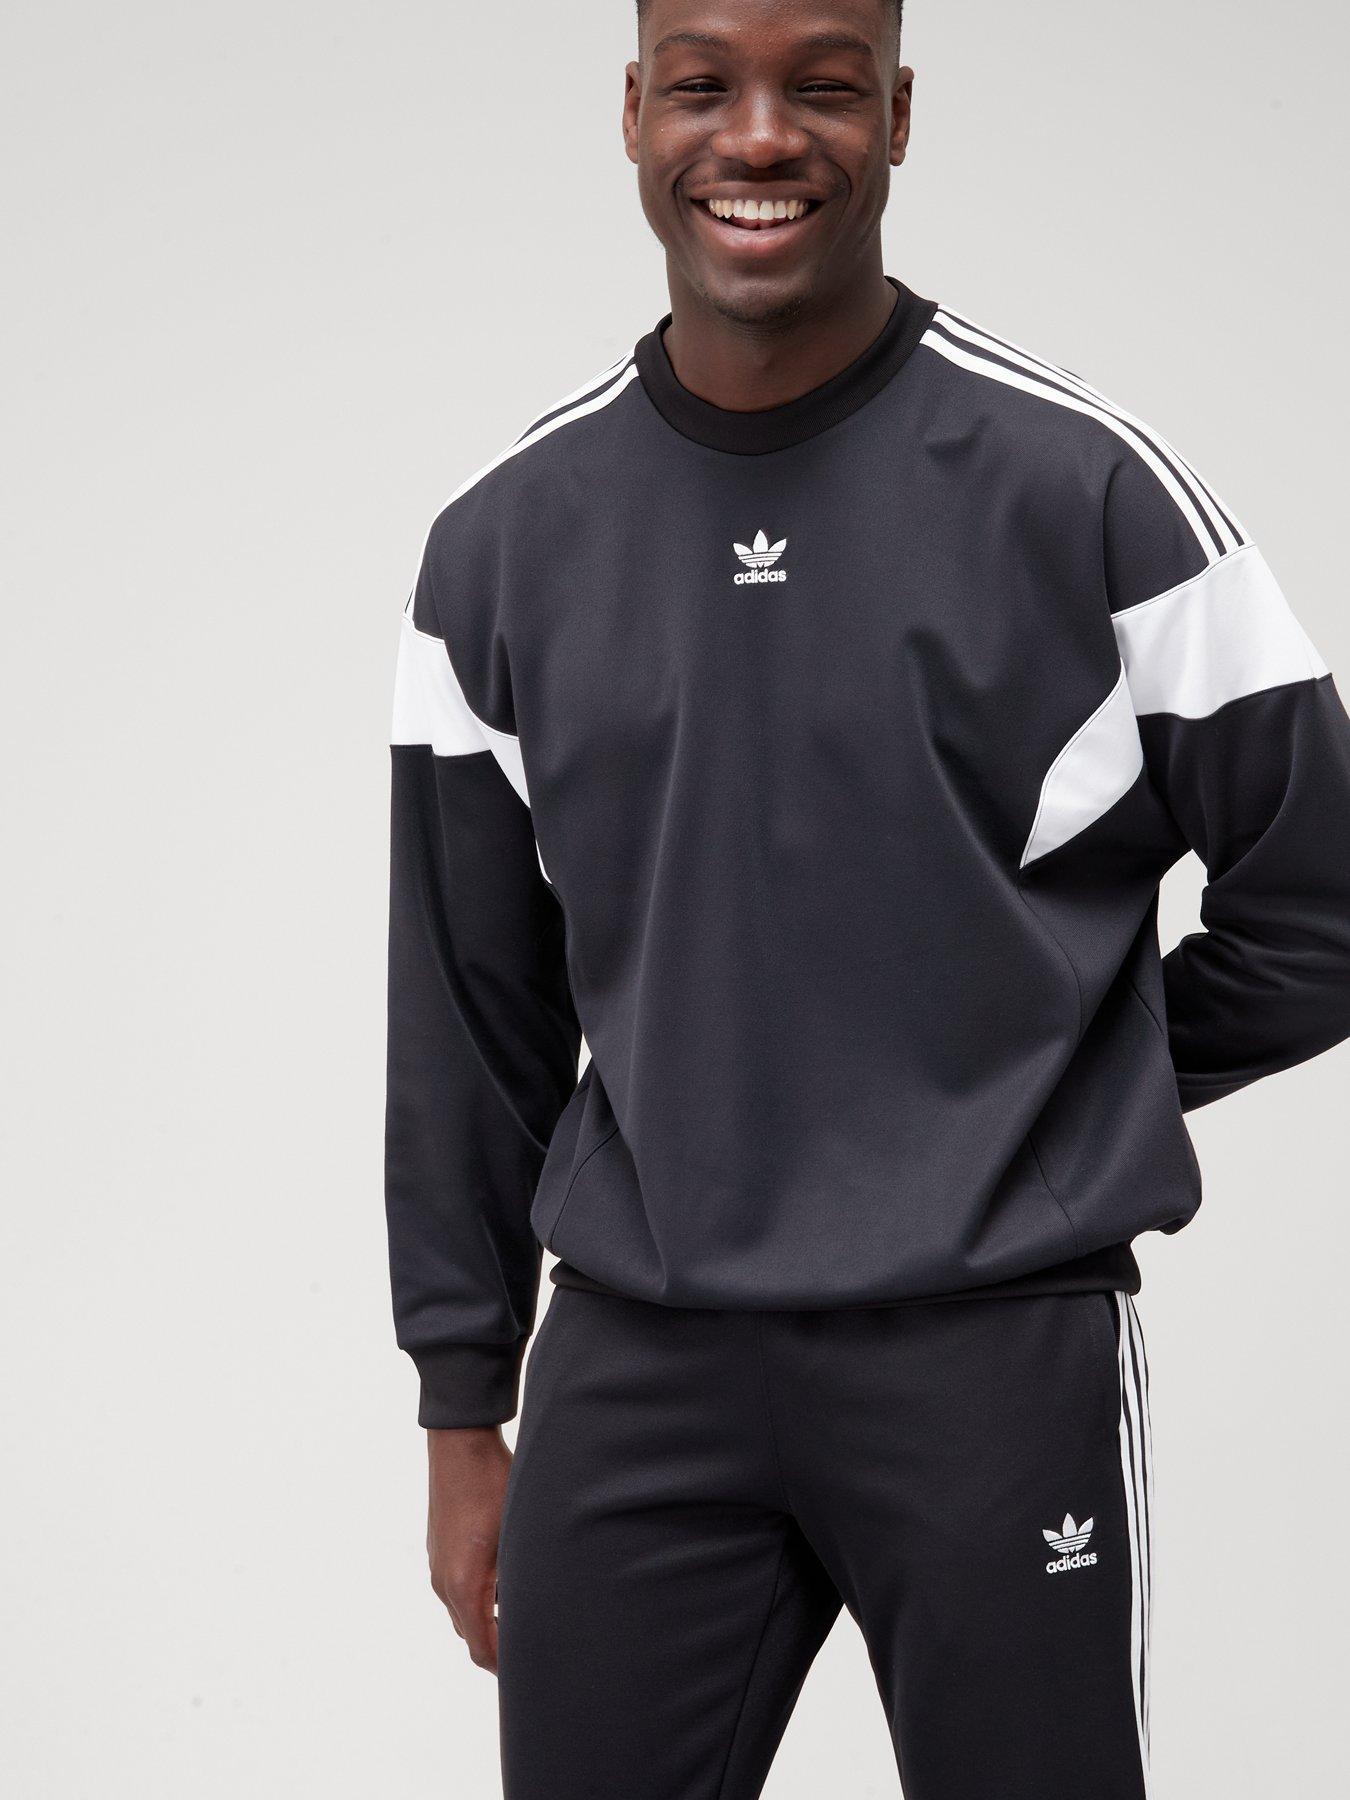 adidas Originals Hoodies | adidas Originals Hoodies at Very.co.uk